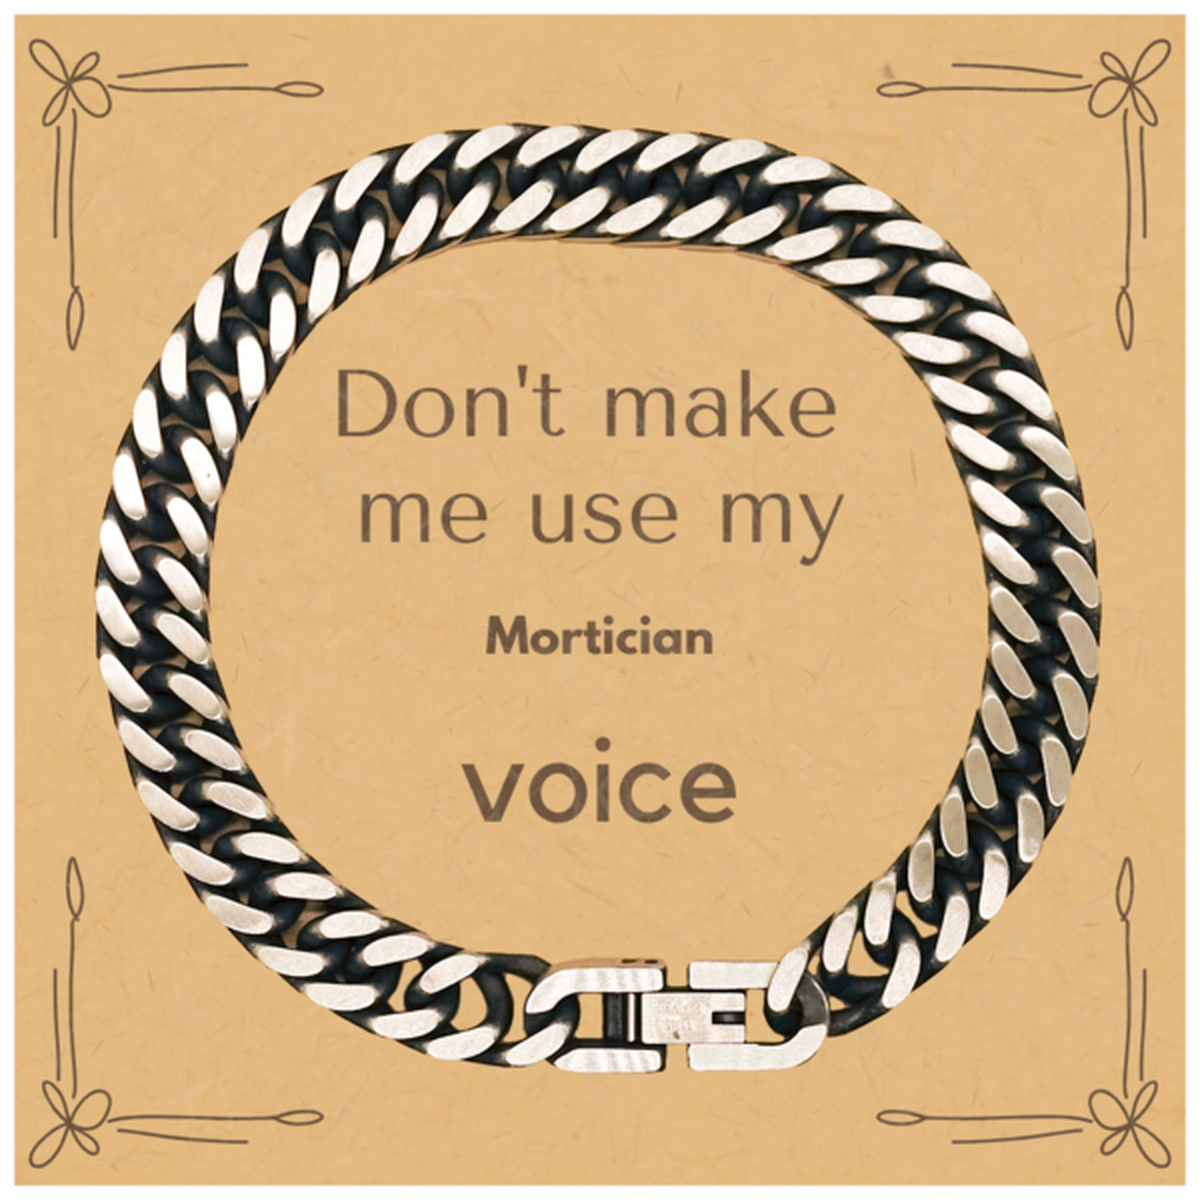 Don't make me use my Mortician voice, Sarcasm Mortician Card Gifts, Christmas Mortician Cuban Link Chain Bracelet Birthday Unique Gifts For Mortician Coworkers, Men, Women, Colleague, Friends